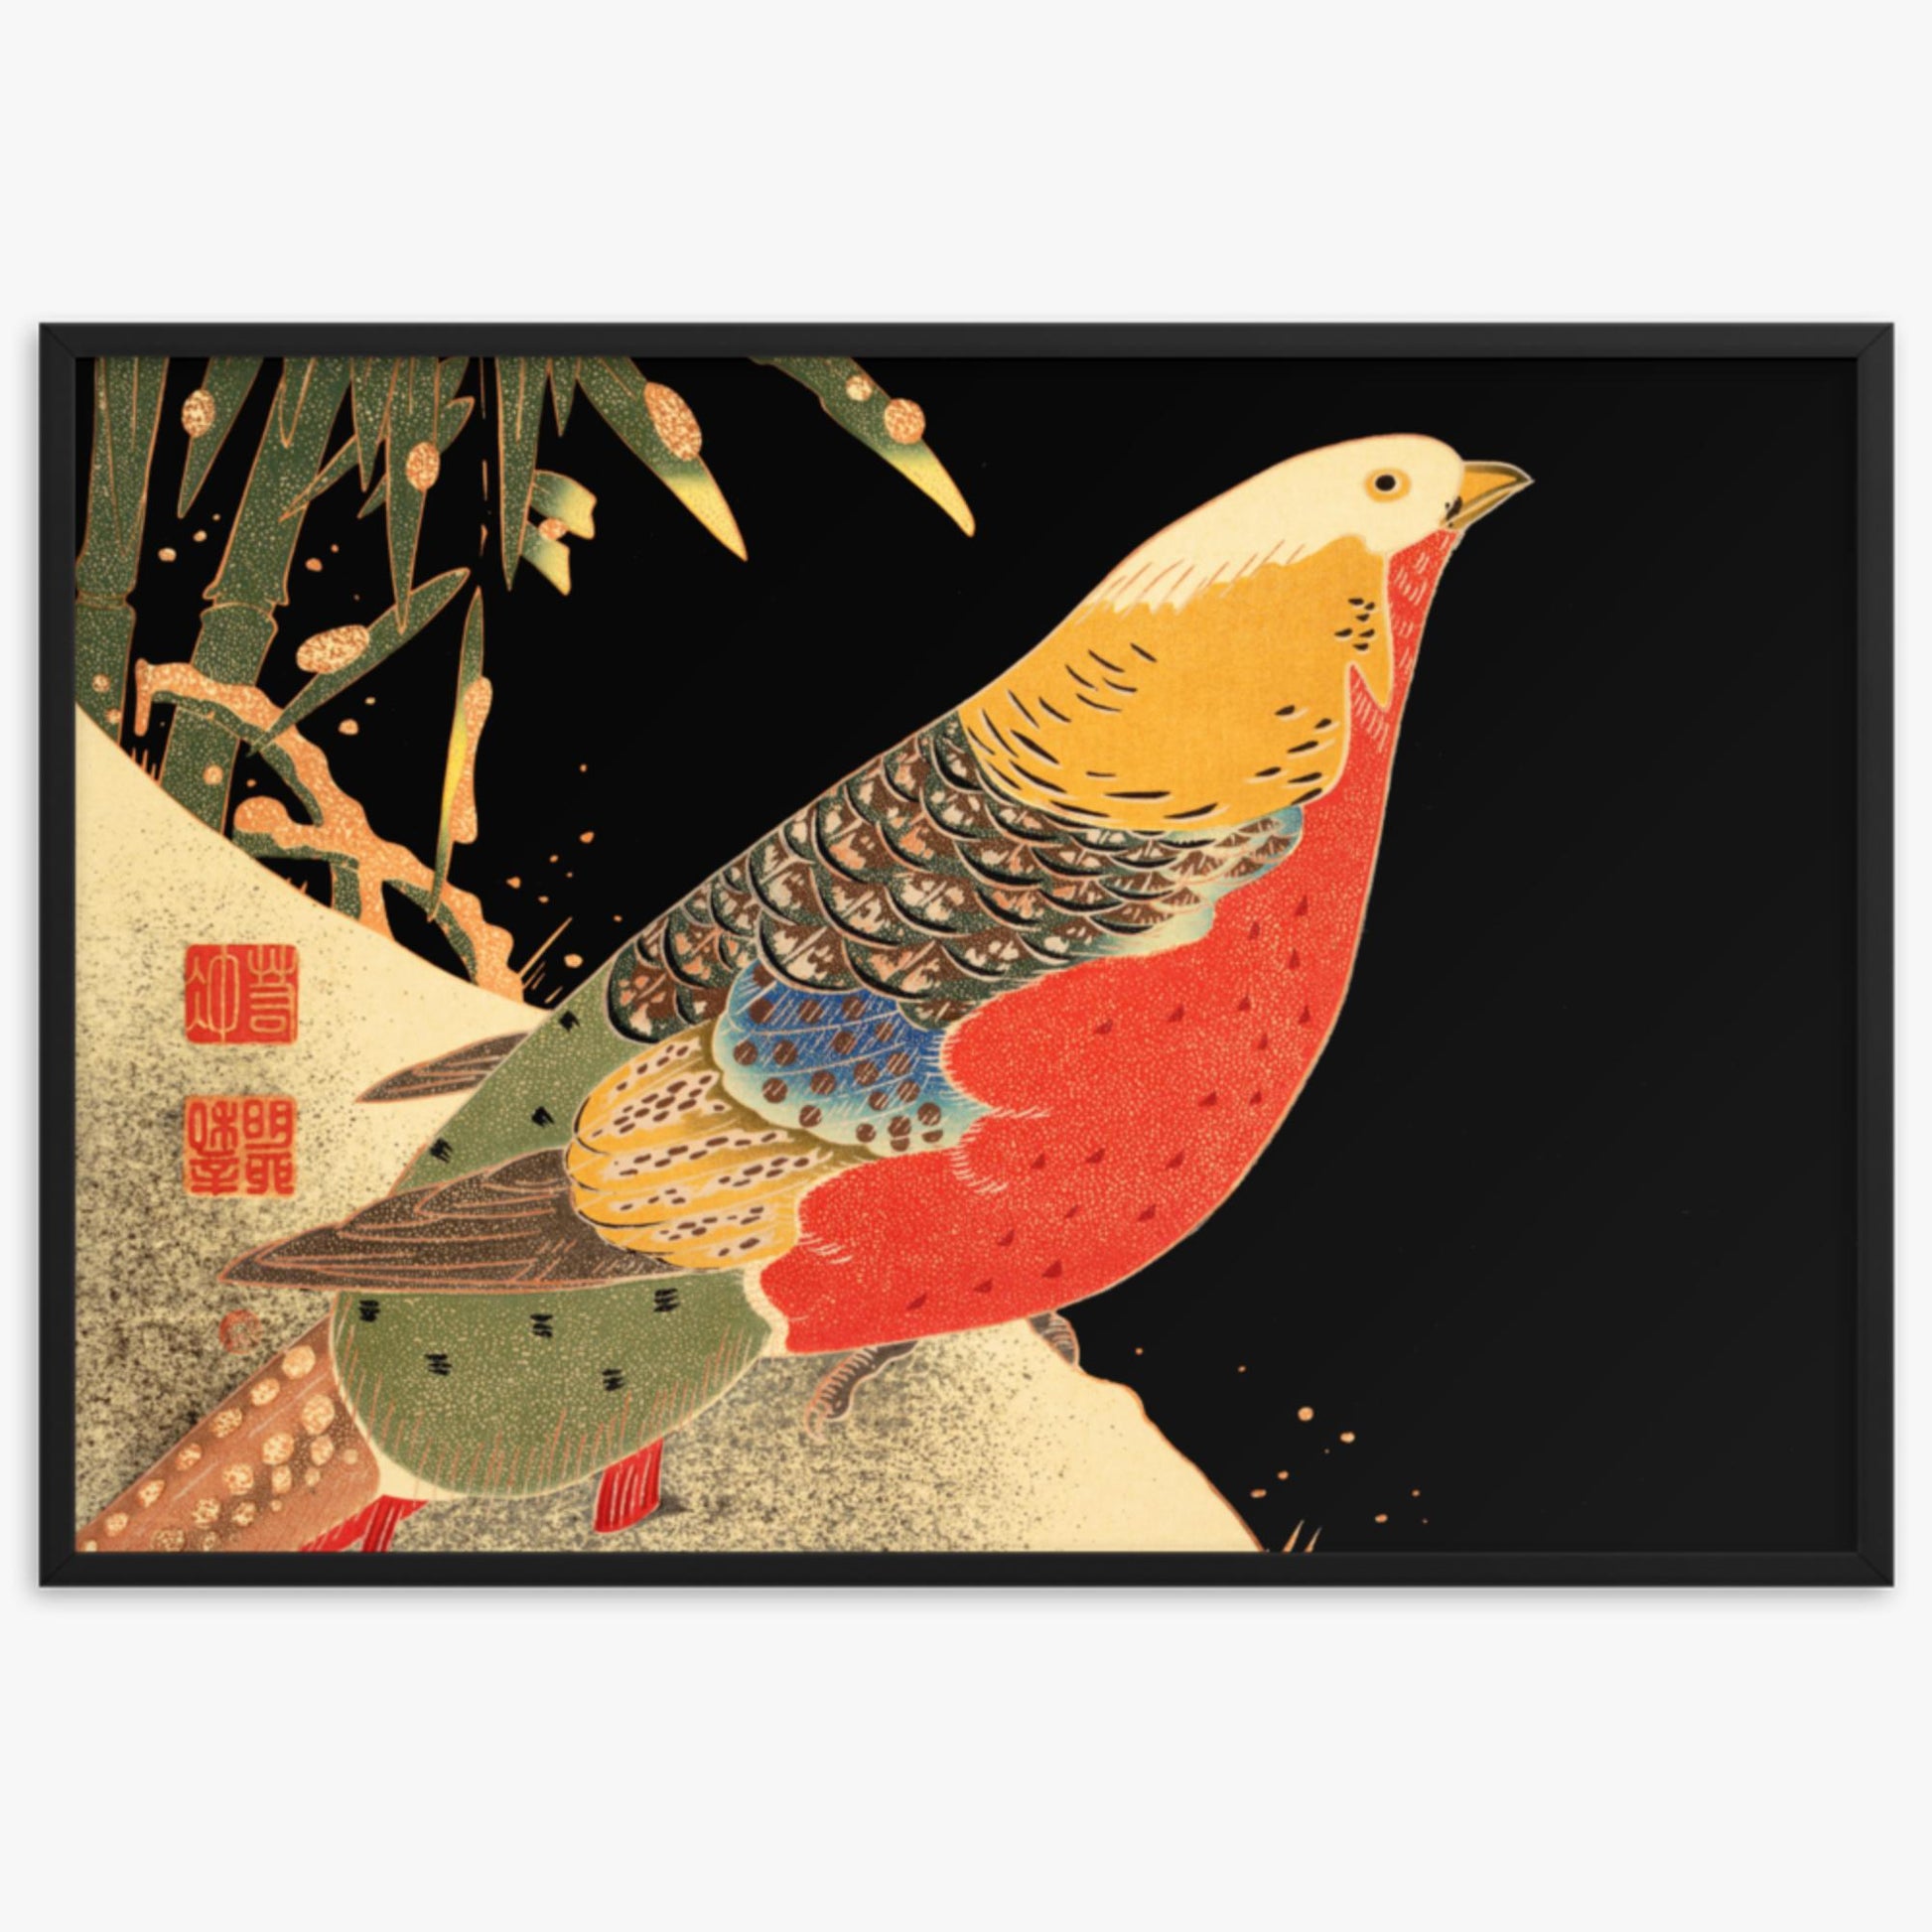 Ito Jakuchu - Golden Pheasant in the Snow 61x91 cm Poster With Black Frame